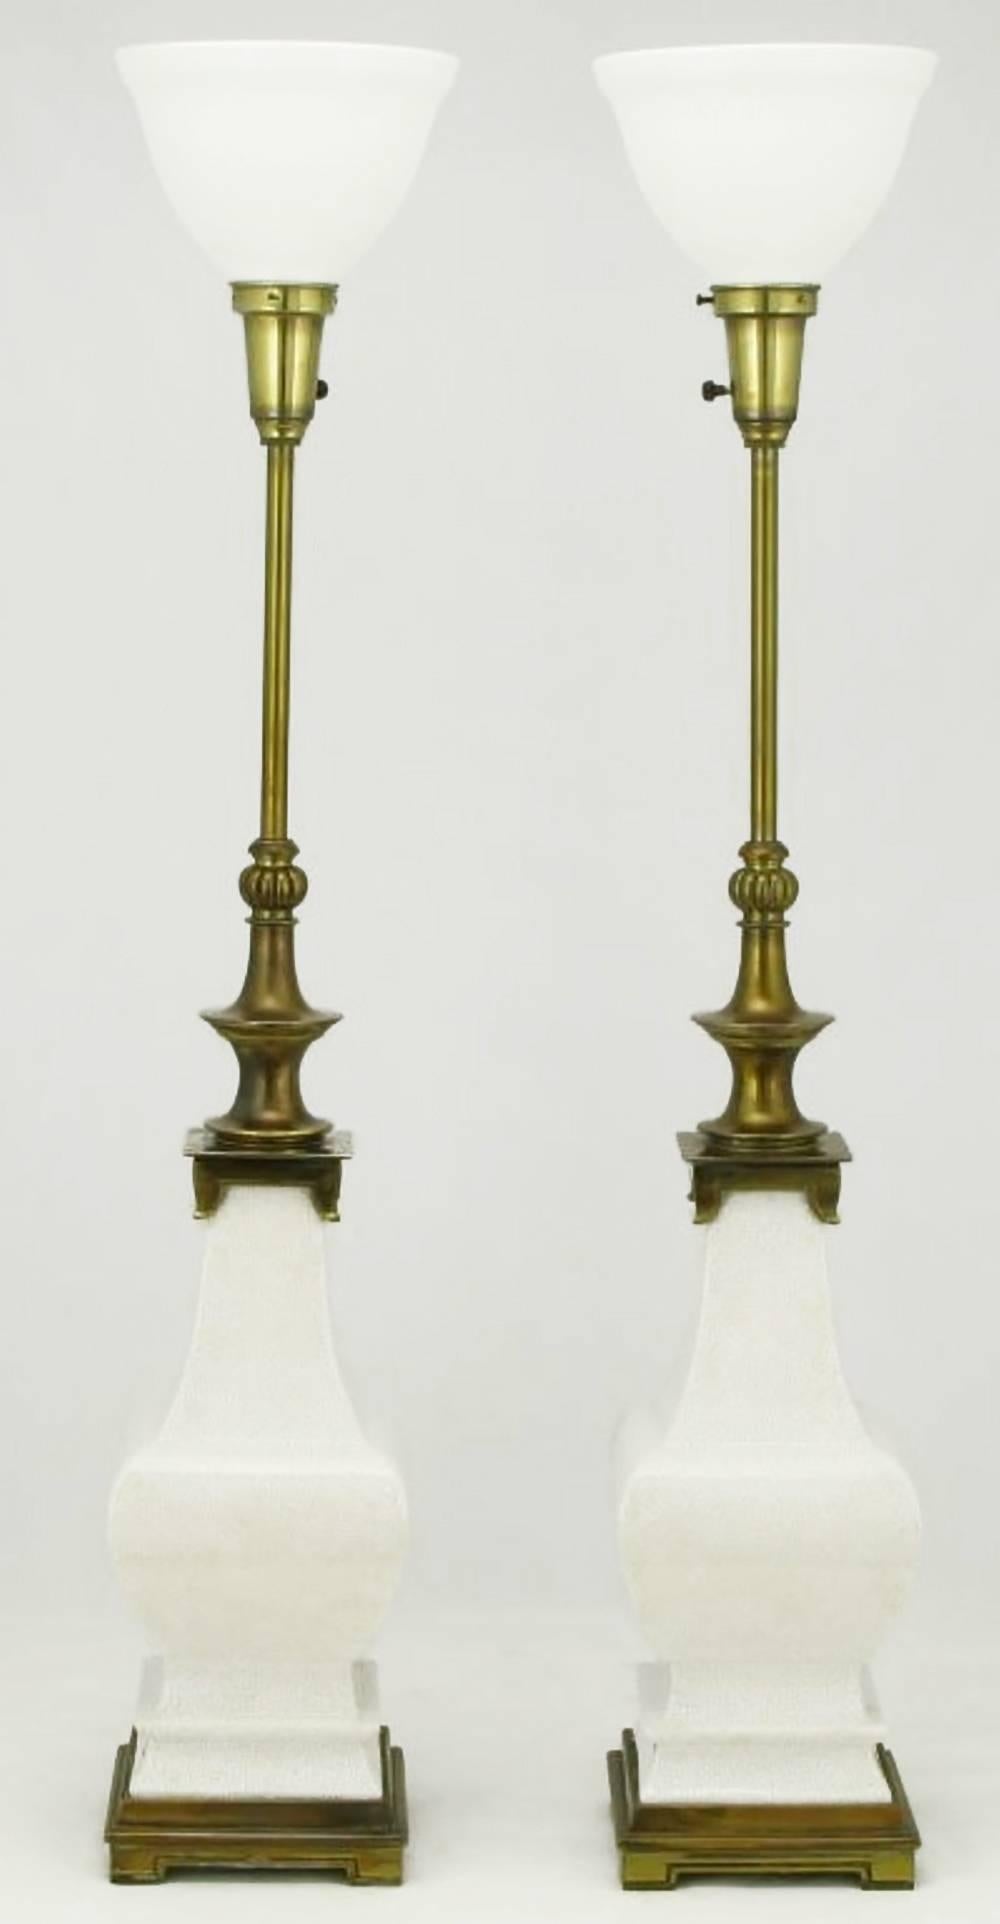 Pair of heavy bodied, white craquelure glazed ceramic table lamps. Patinated brass appointments from the best days of American premier lighting company, Stiffel. Sold sans shades.